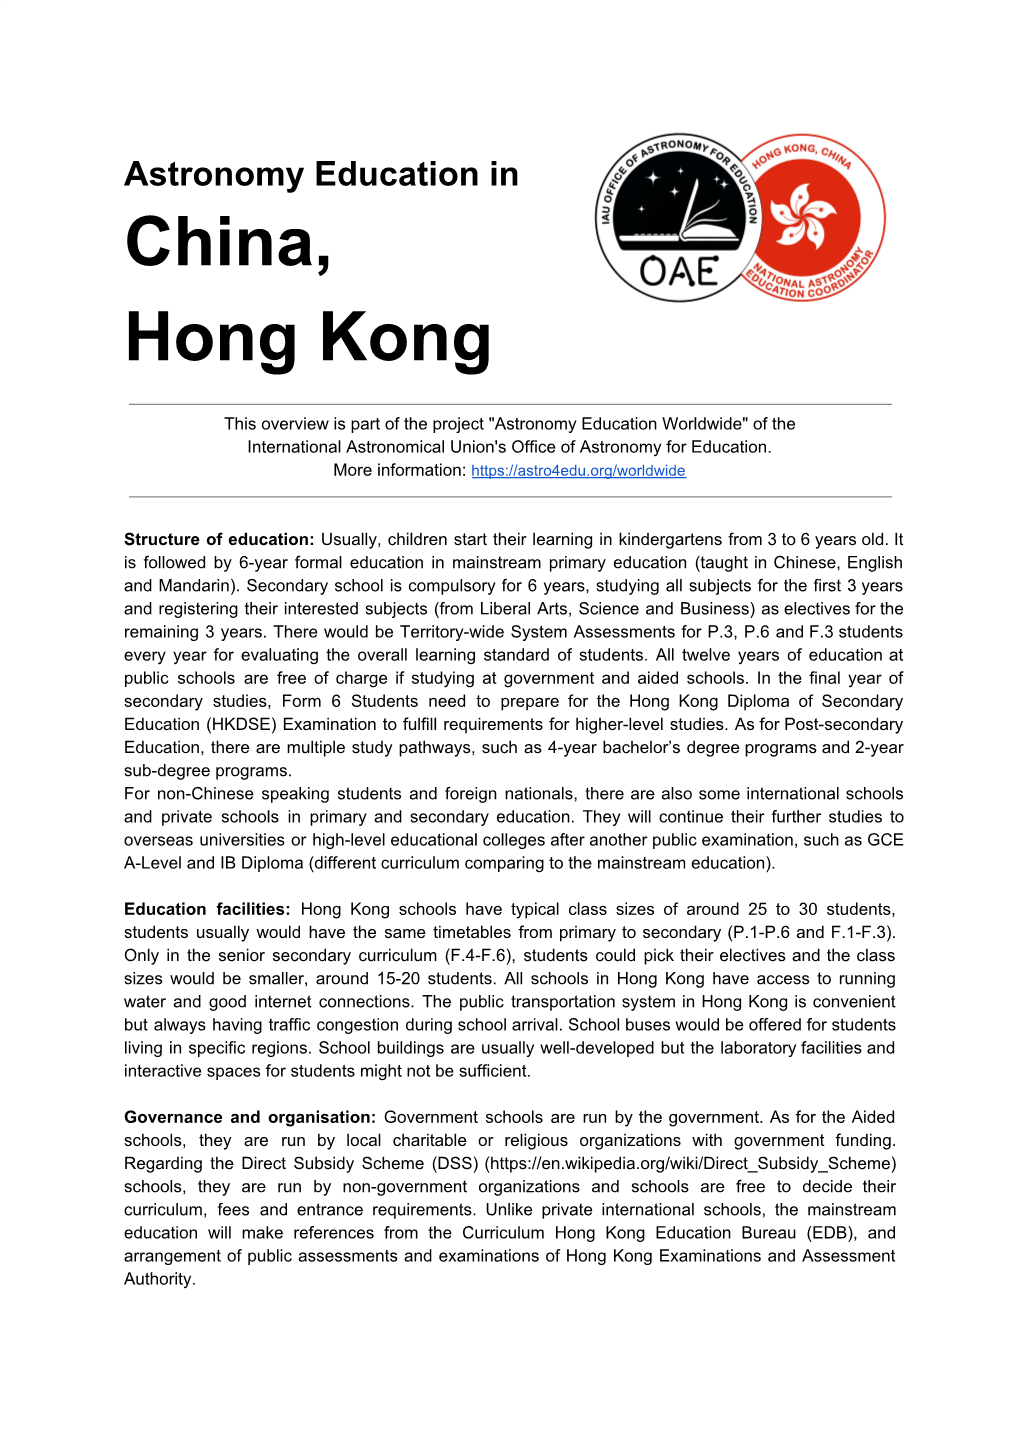 Astronomy Education in China, Hong Kong Or on This Document Please Contact the Office of Astronomy for Education (Oae@Astro4edu.Org)